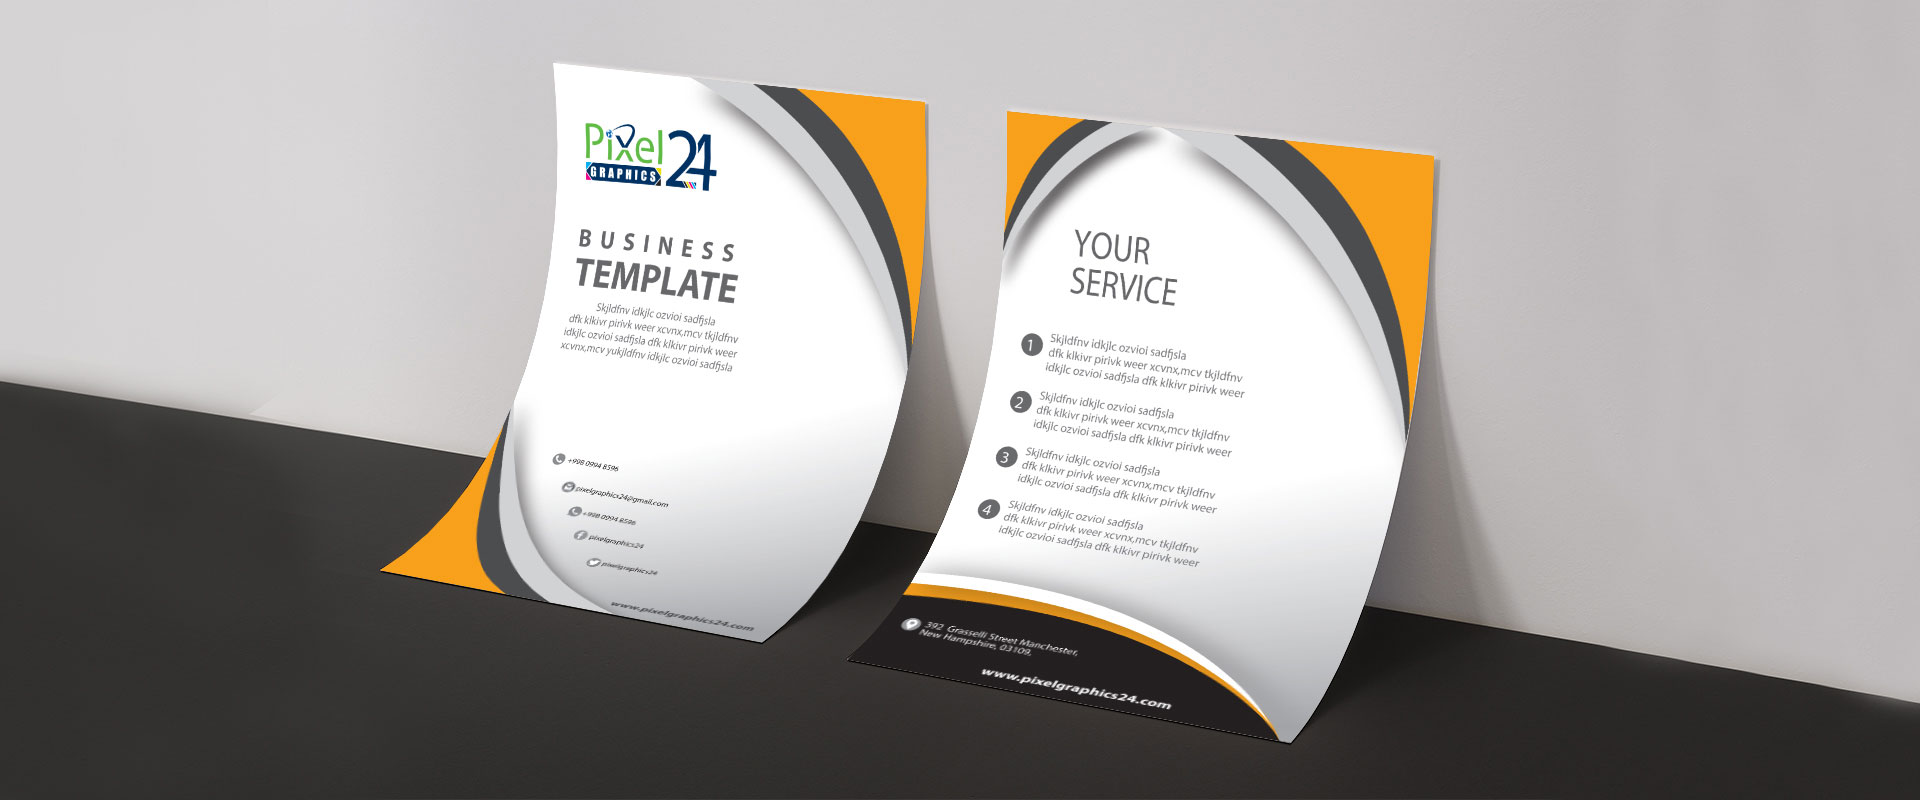 Flyer Design || Clipping Path Services || Photo Editing Services || Image Editing Services